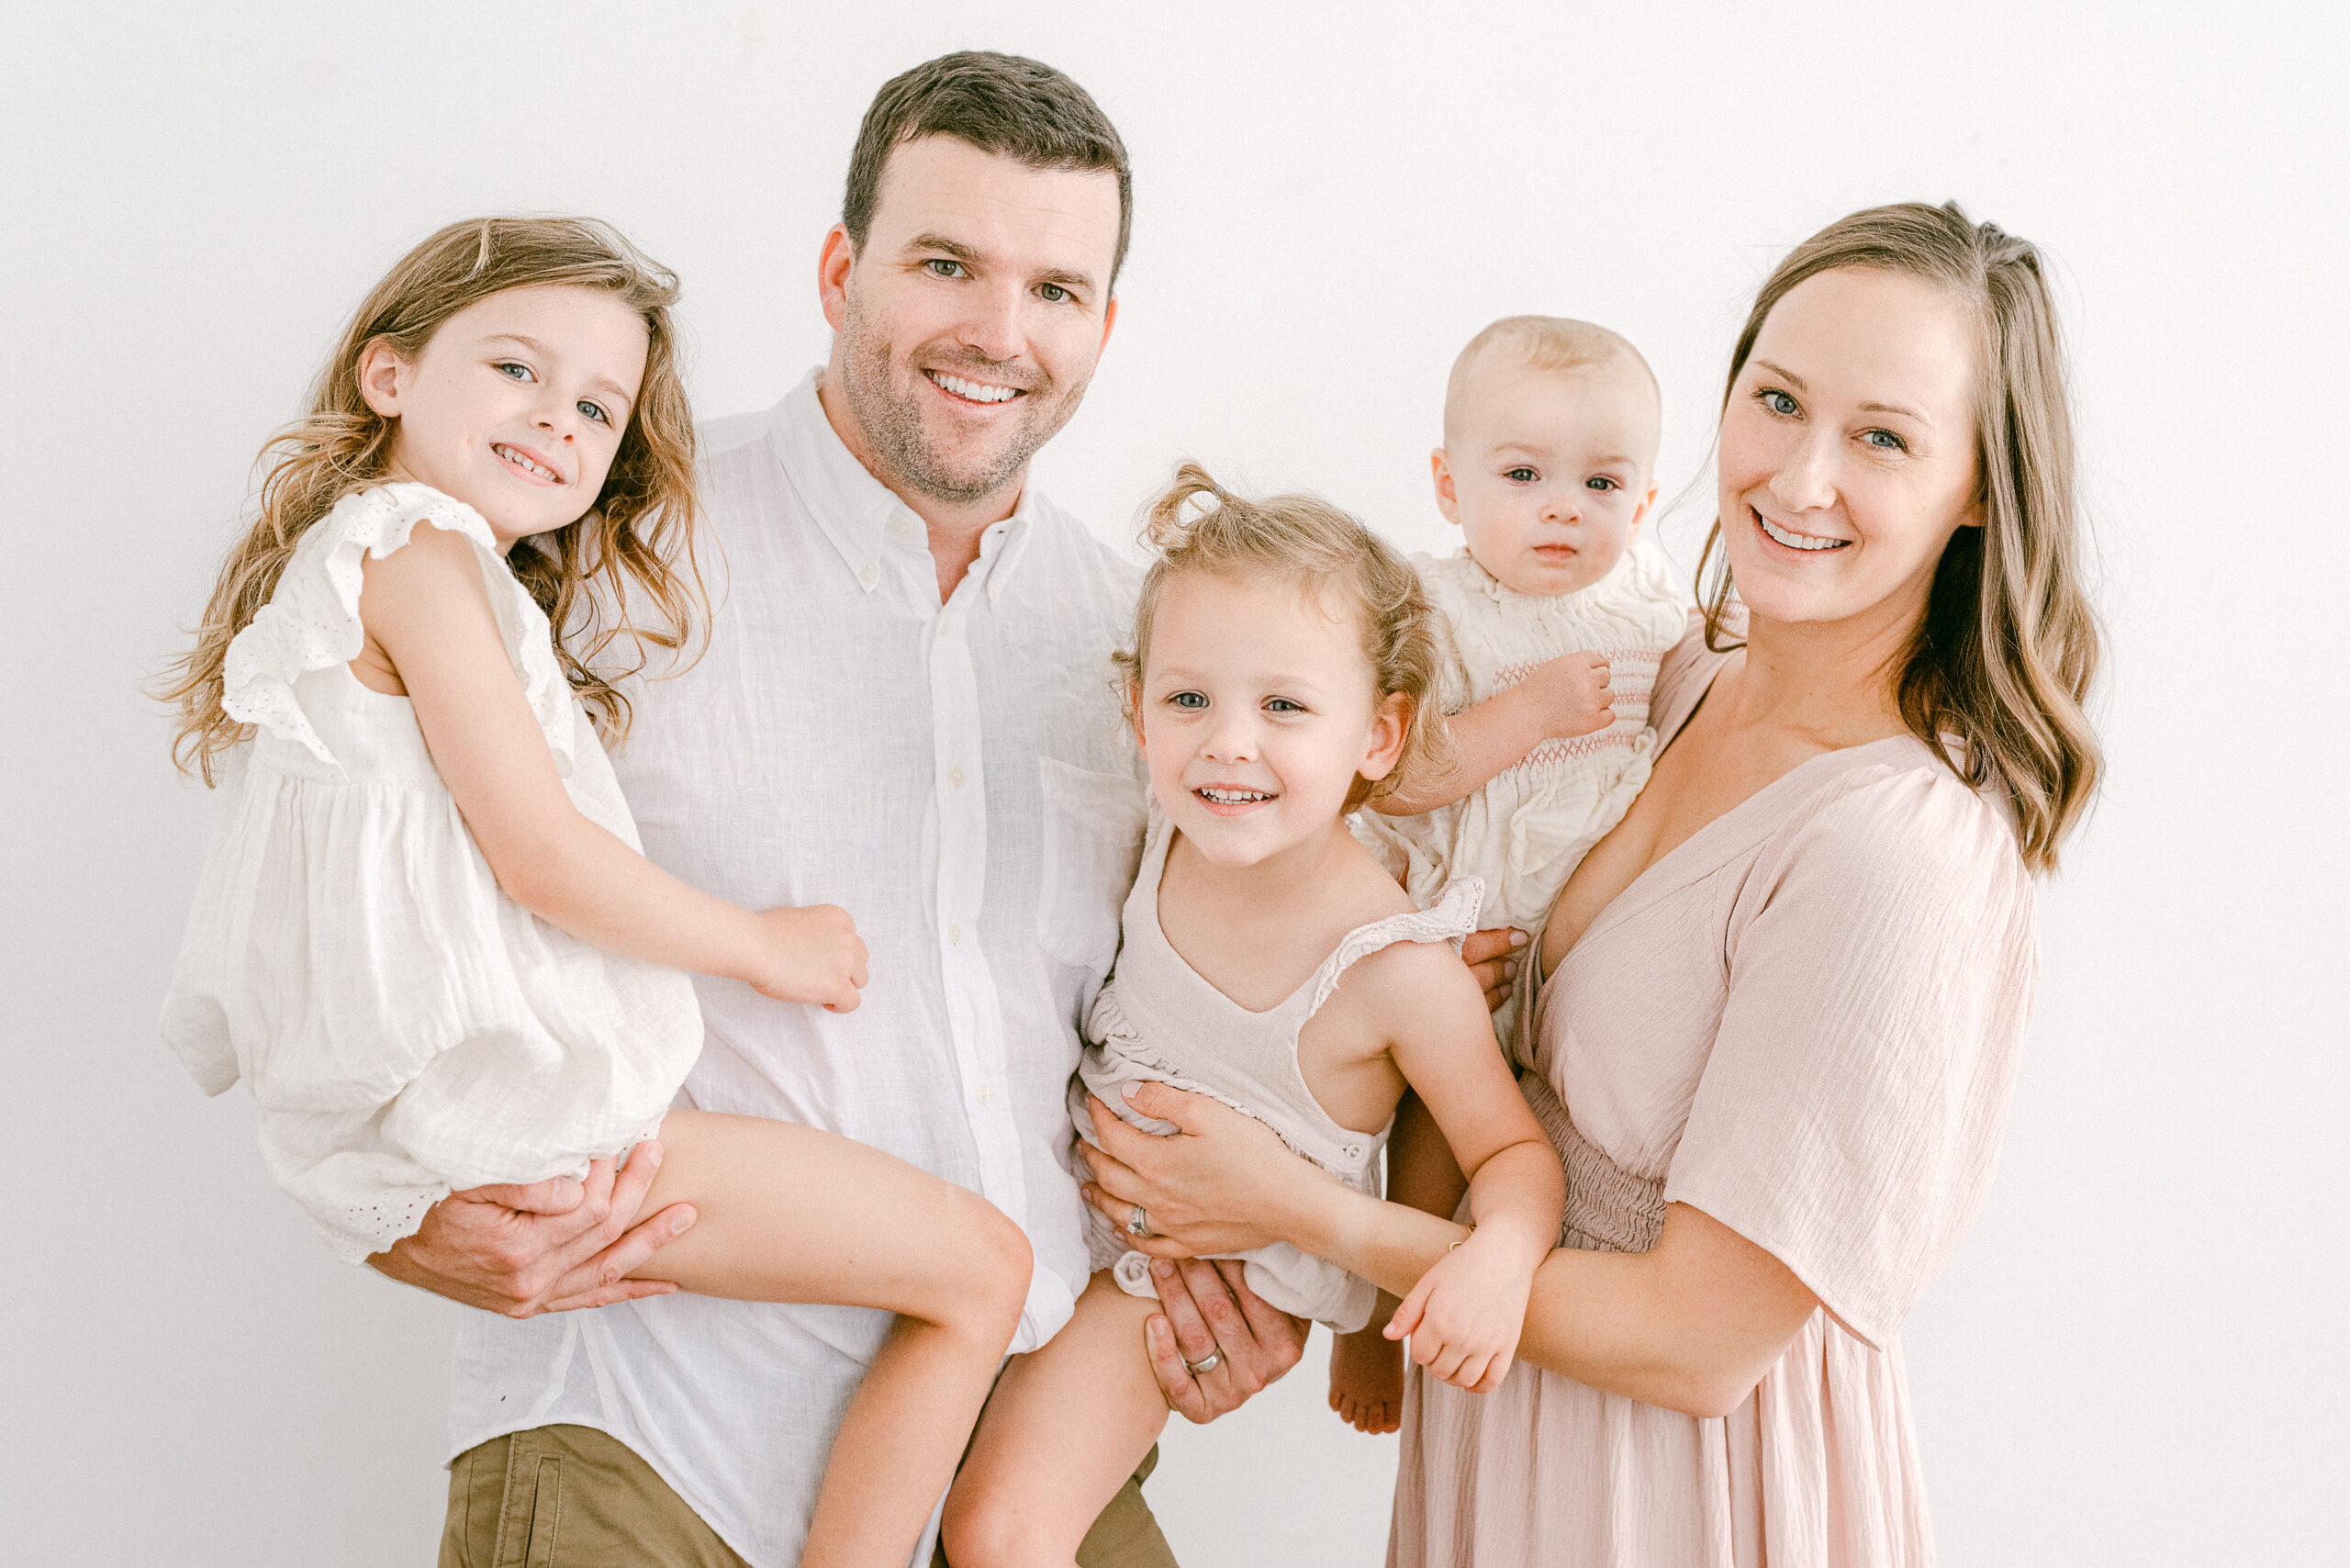 Gilbert family of five dressed in neutral colors for photoshoot in studio.